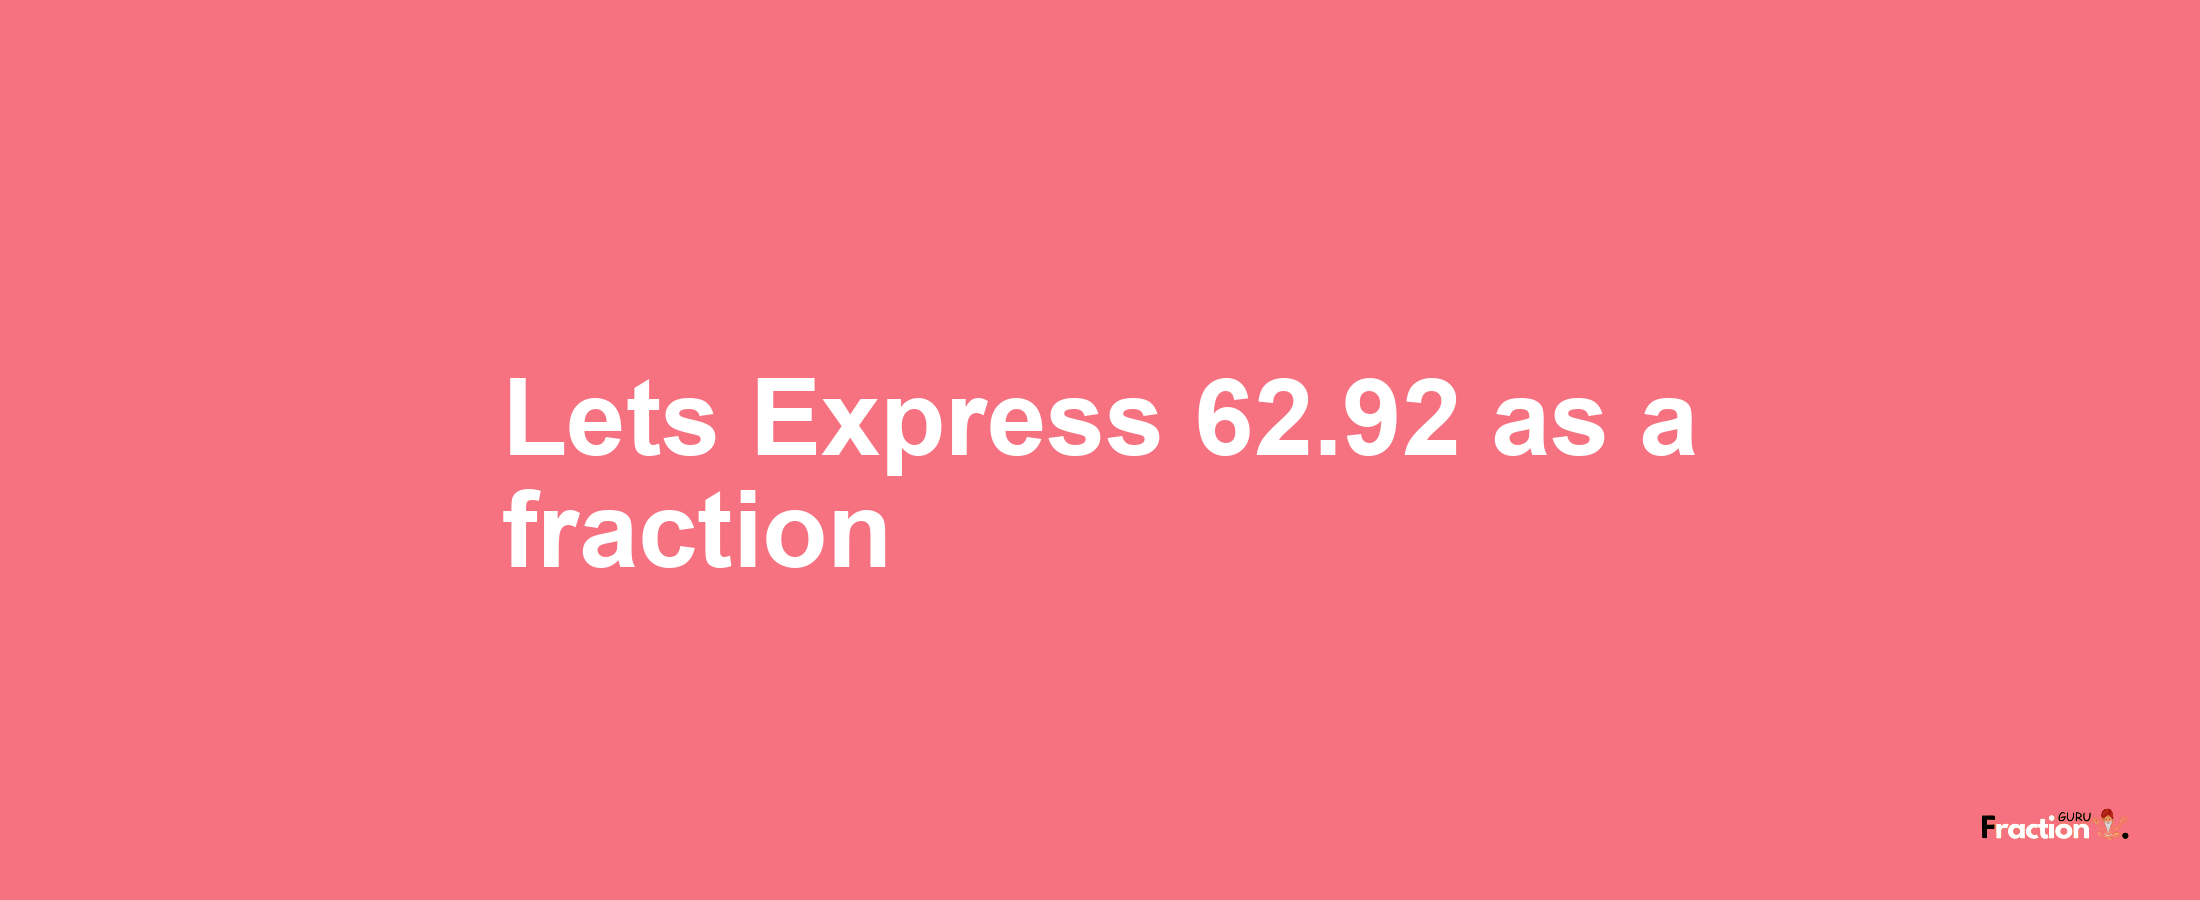 Lets Express 62.92 as afraction